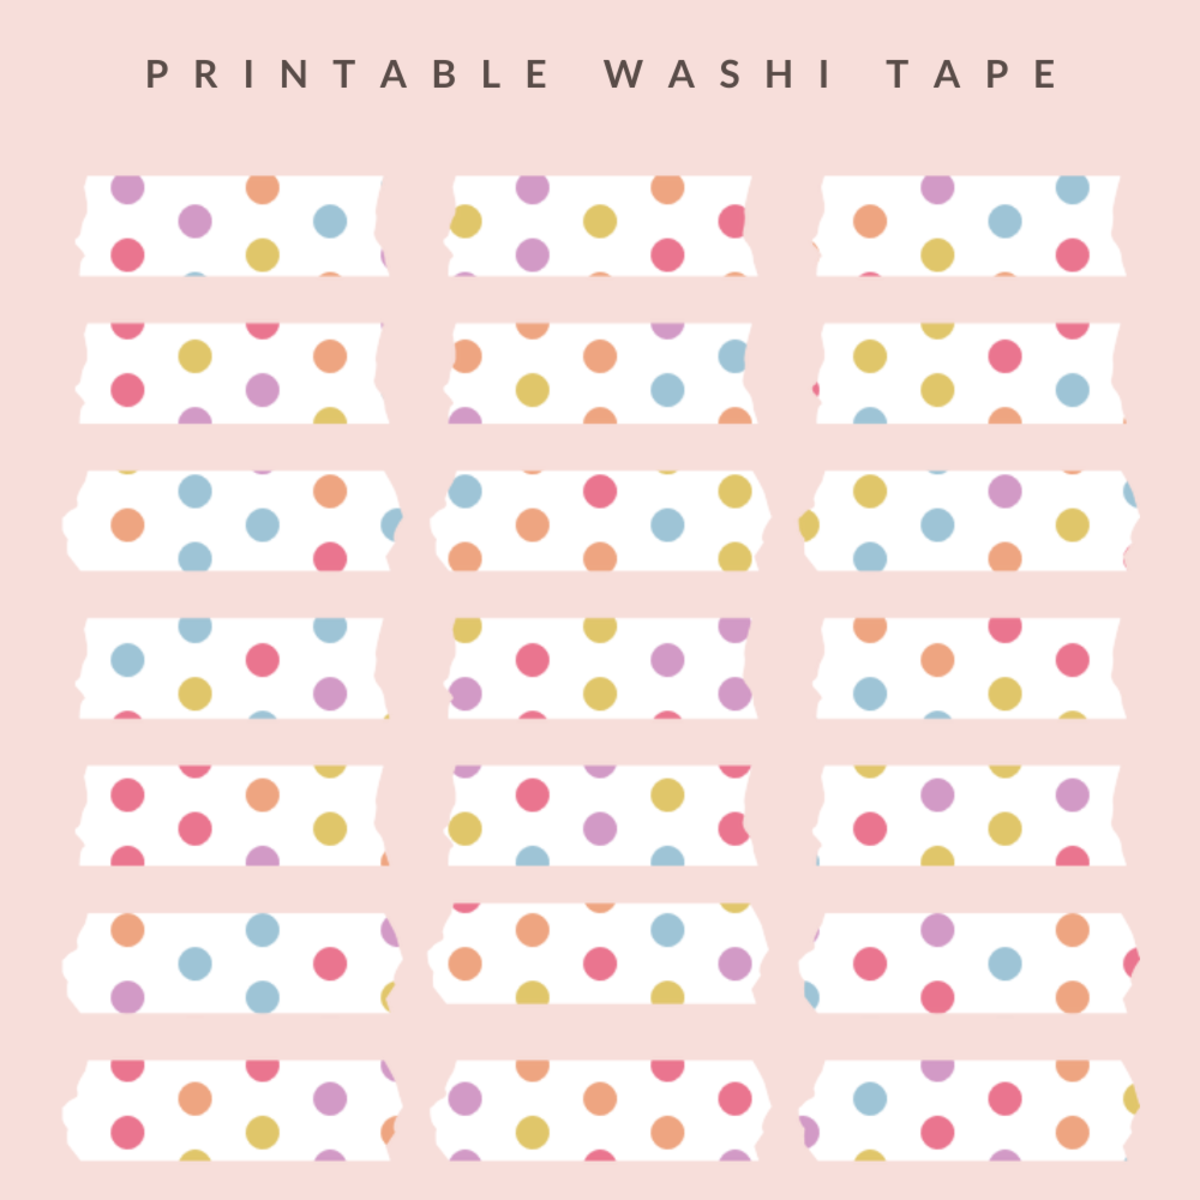 Get inspired with these printable washi tape designs!